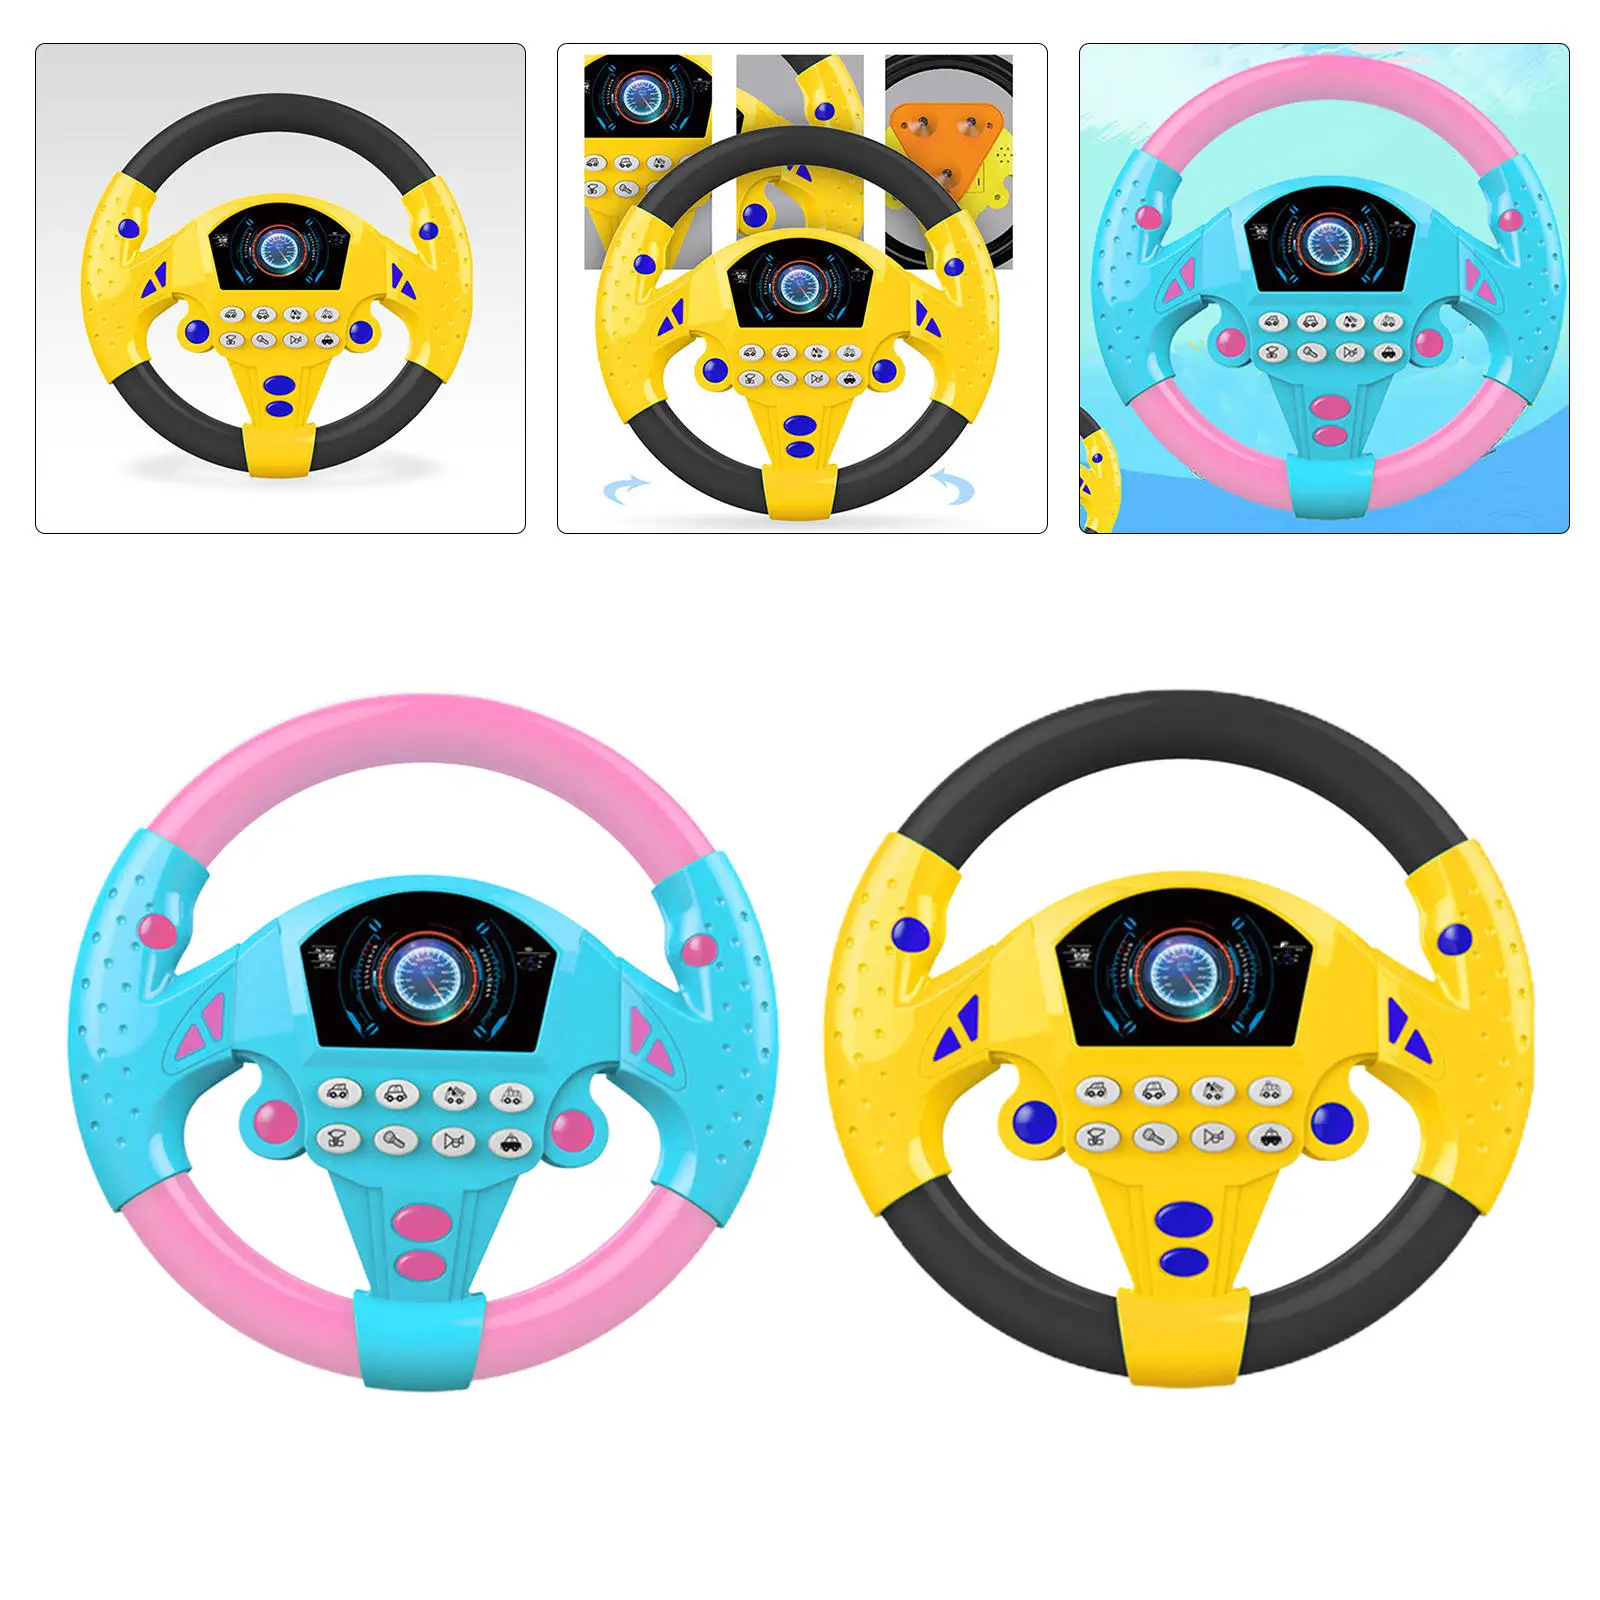 Steering Wheel Toy Develop Imaginatin Adsorption Small Wheel Toy for Baby Carriage Driver